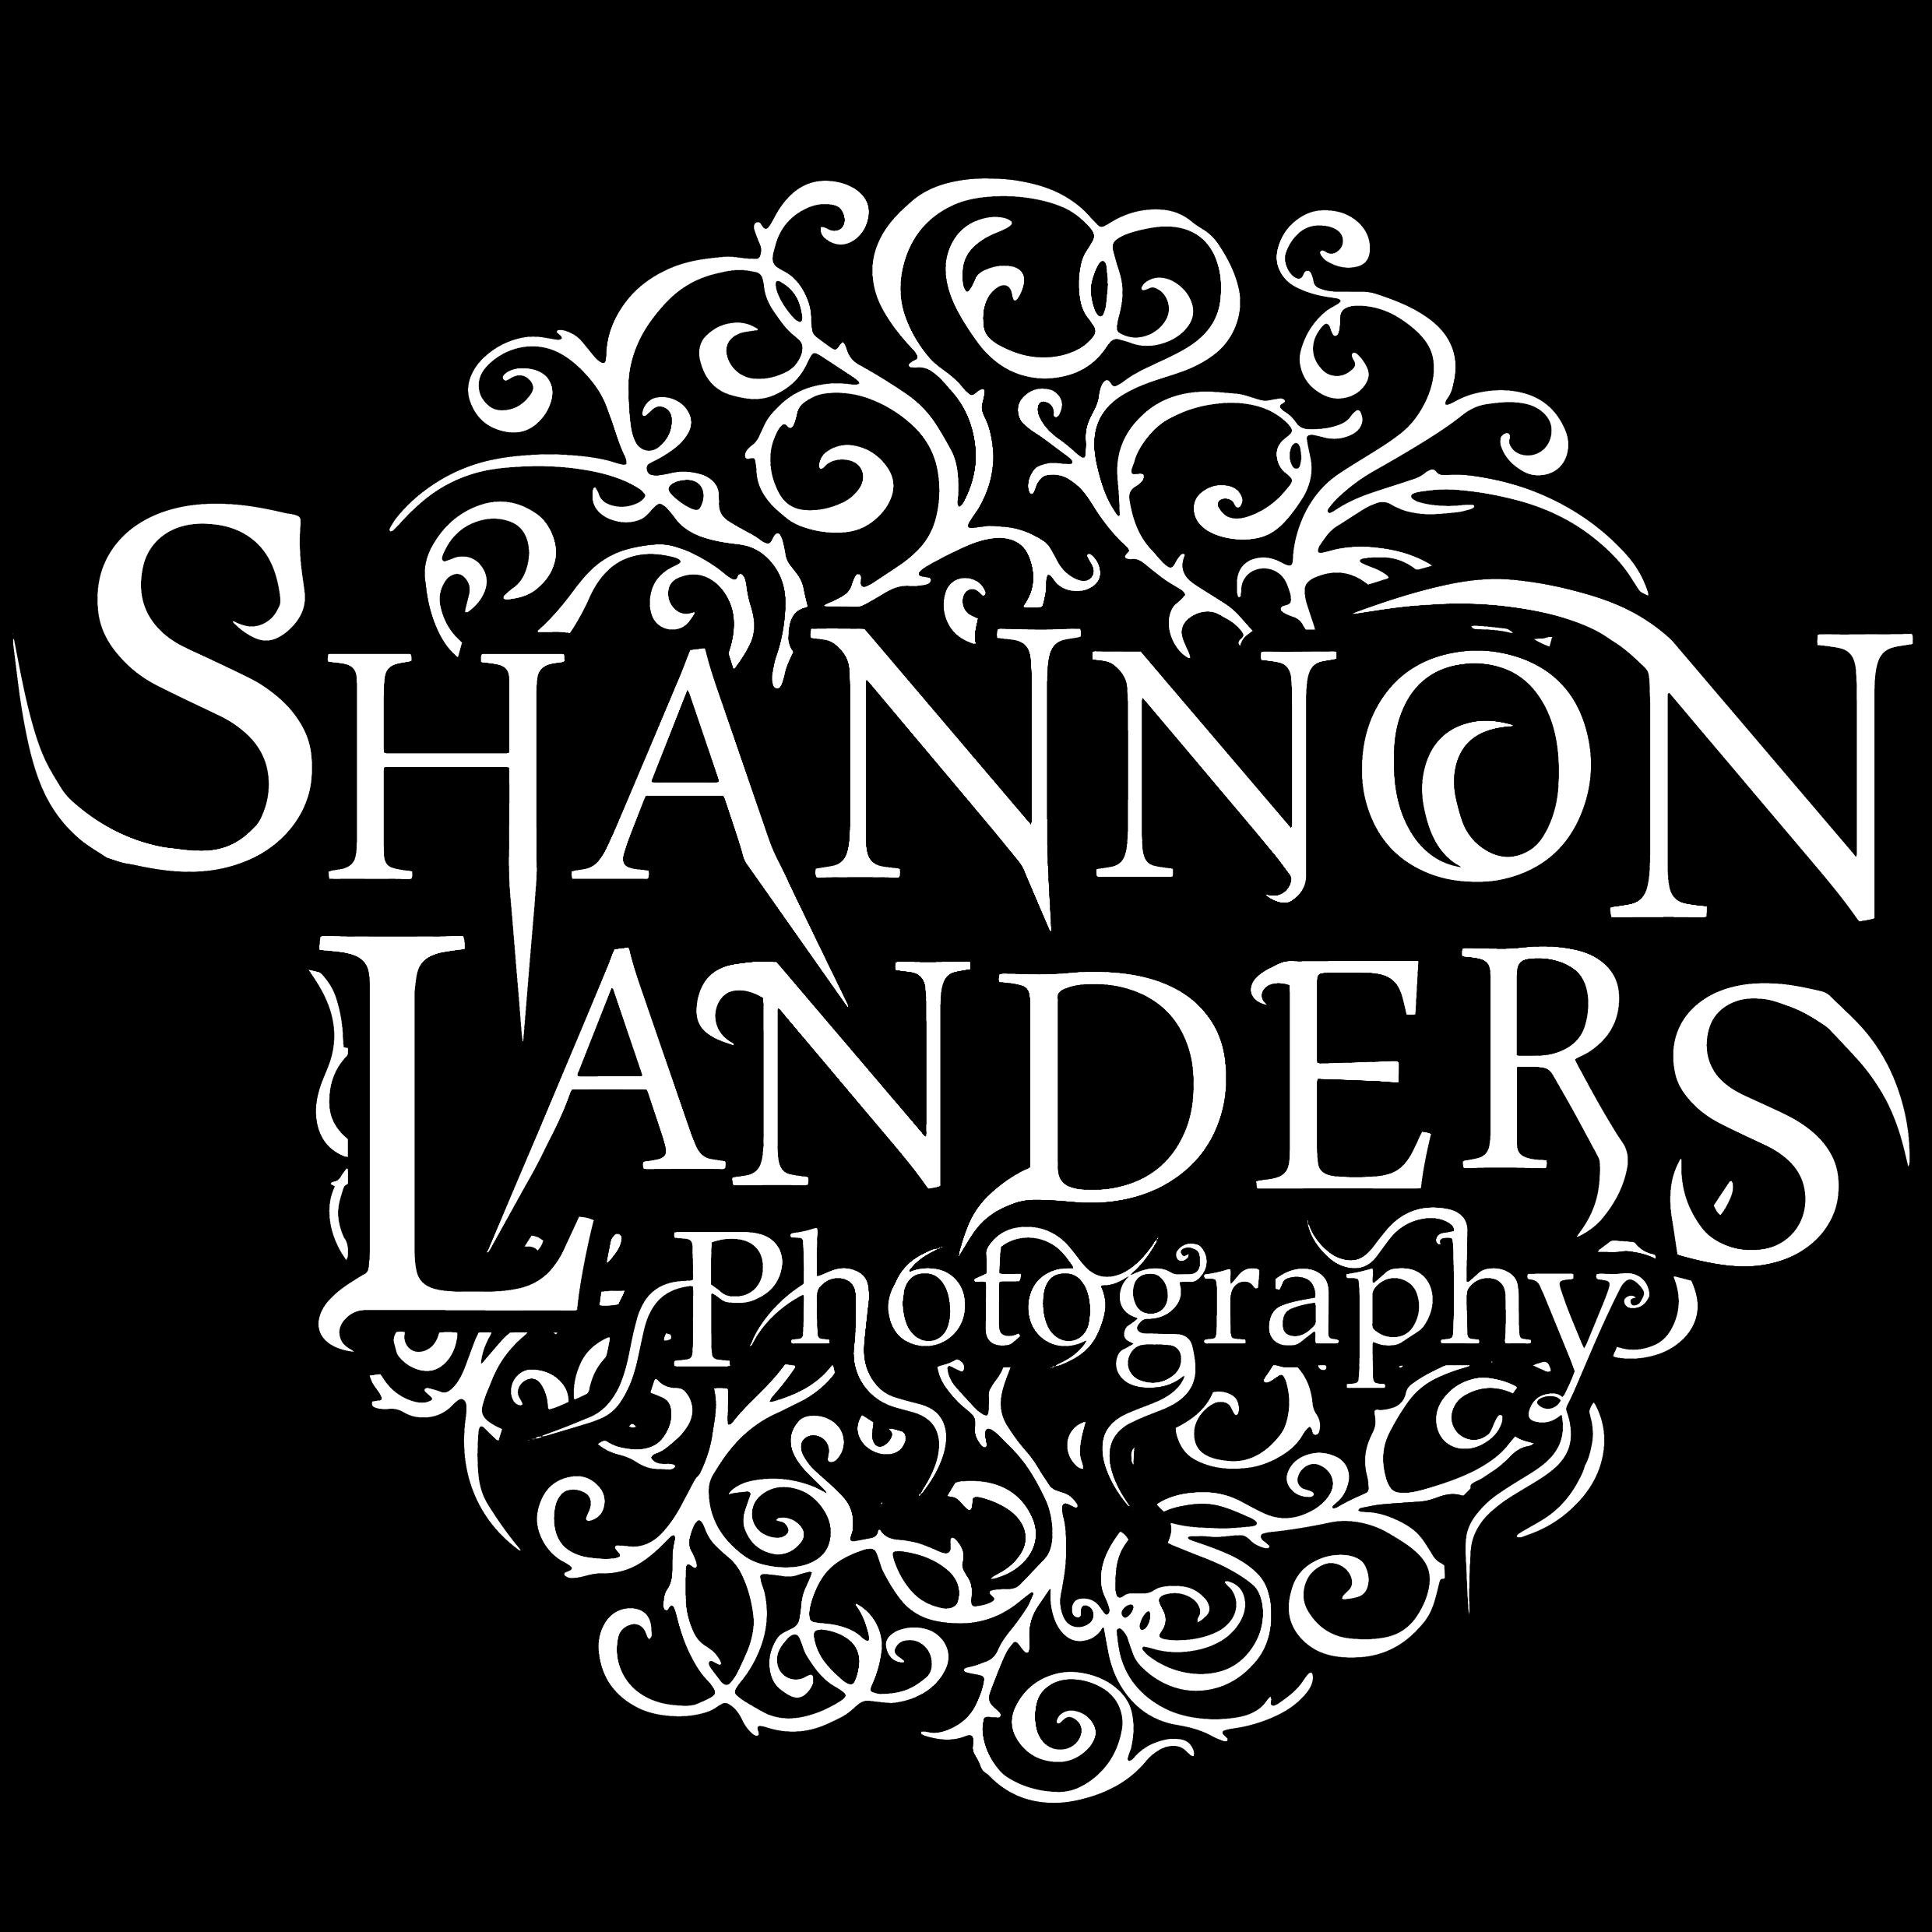 Shannon Landers Photography